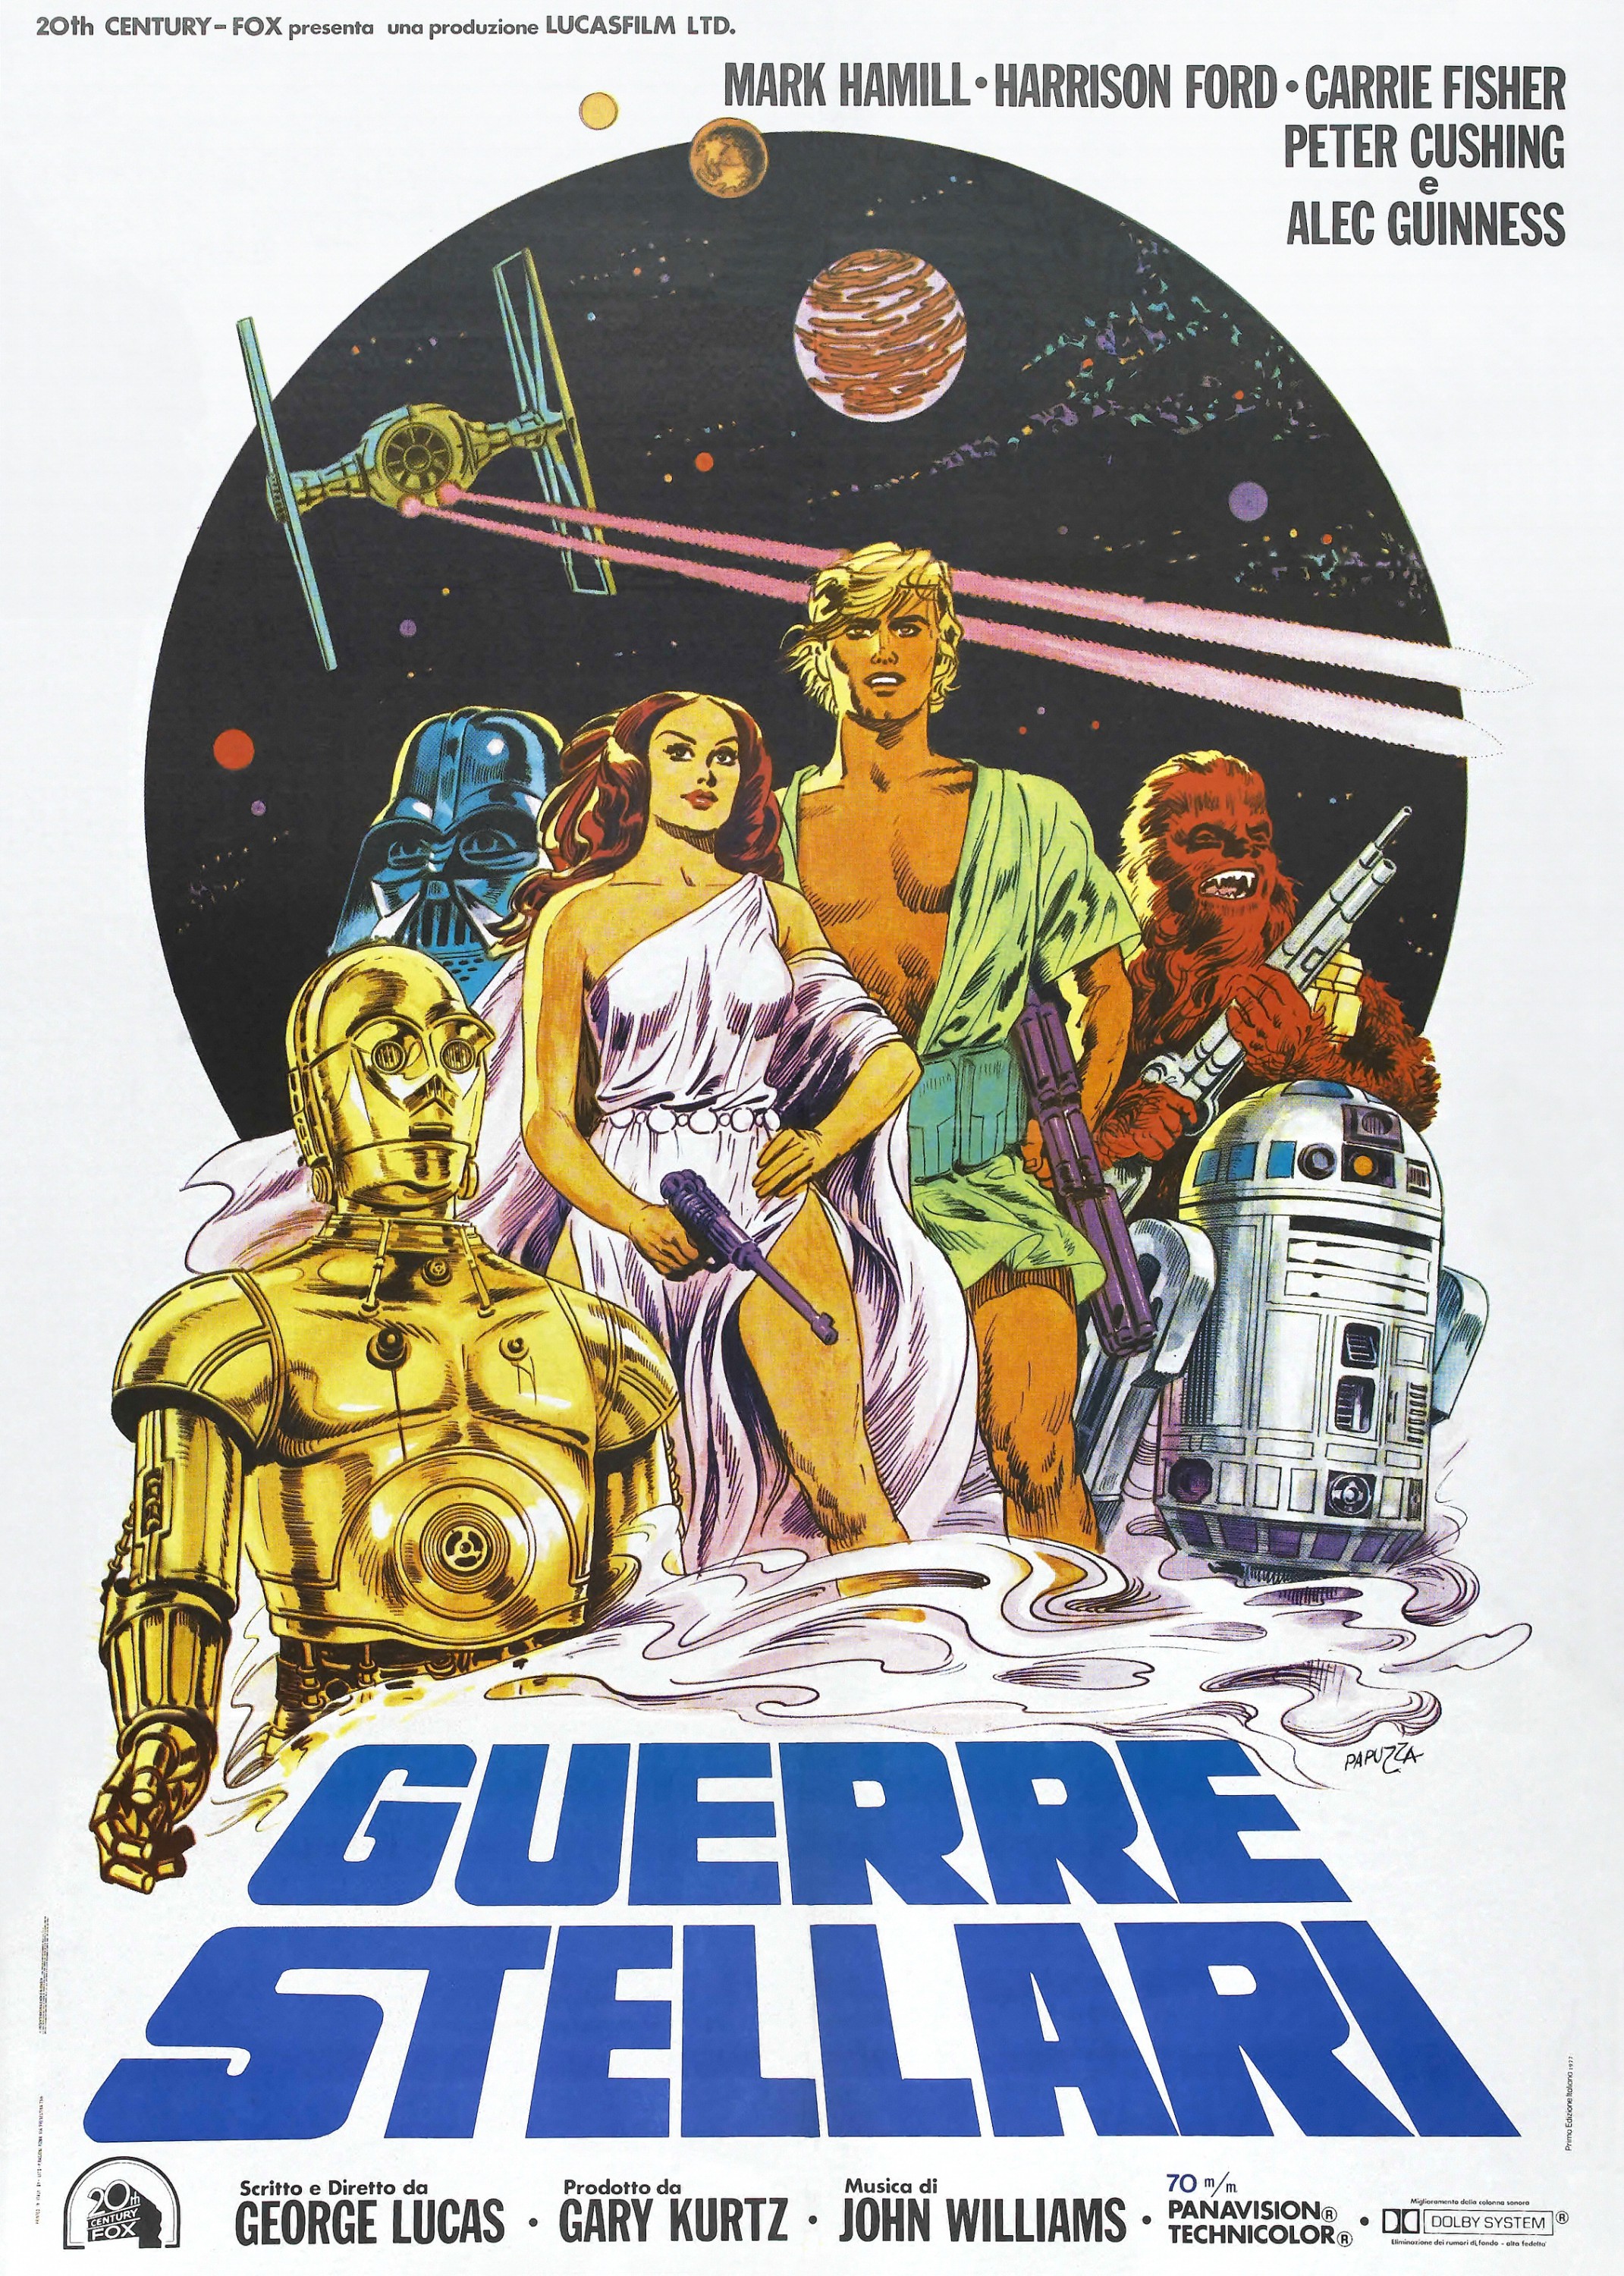 Mega Sized Movie Poster Image for Star Wars (#9 of 16)